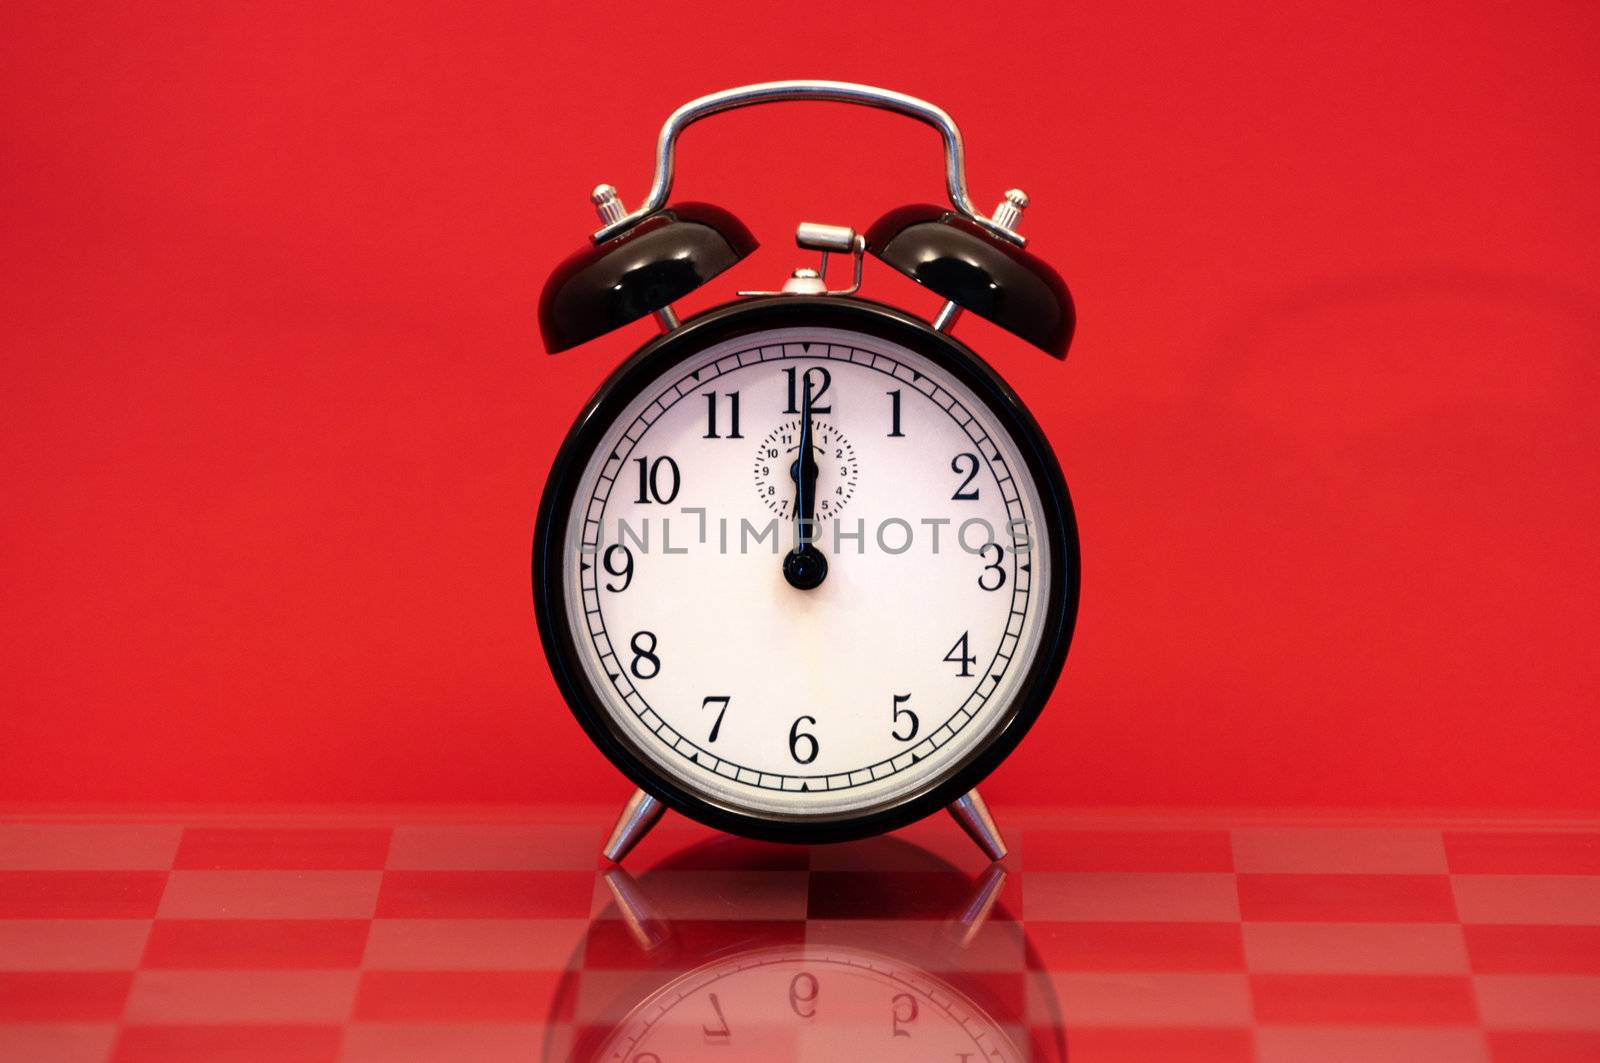 Vintage Alarm Clock Showing 12 O'Clock Isolated on a Red Background.